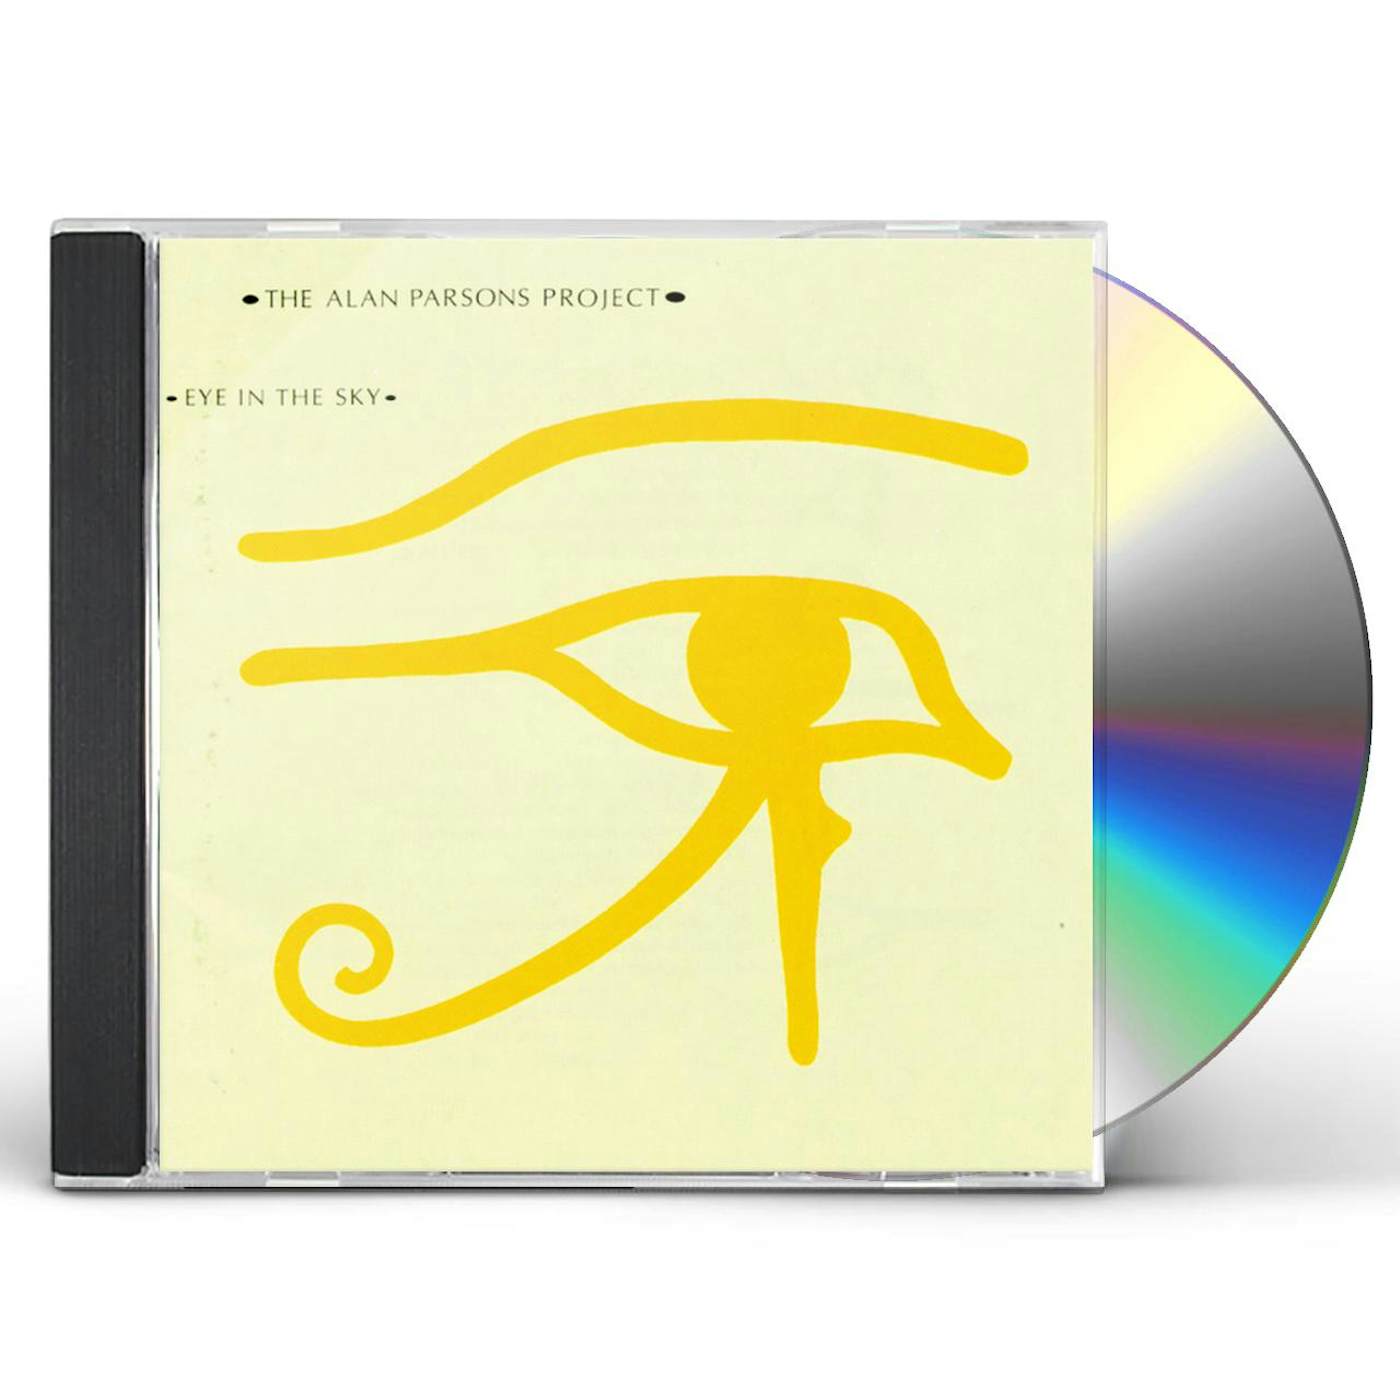 The Alan Parsons Project EYE IN THE SKY CD